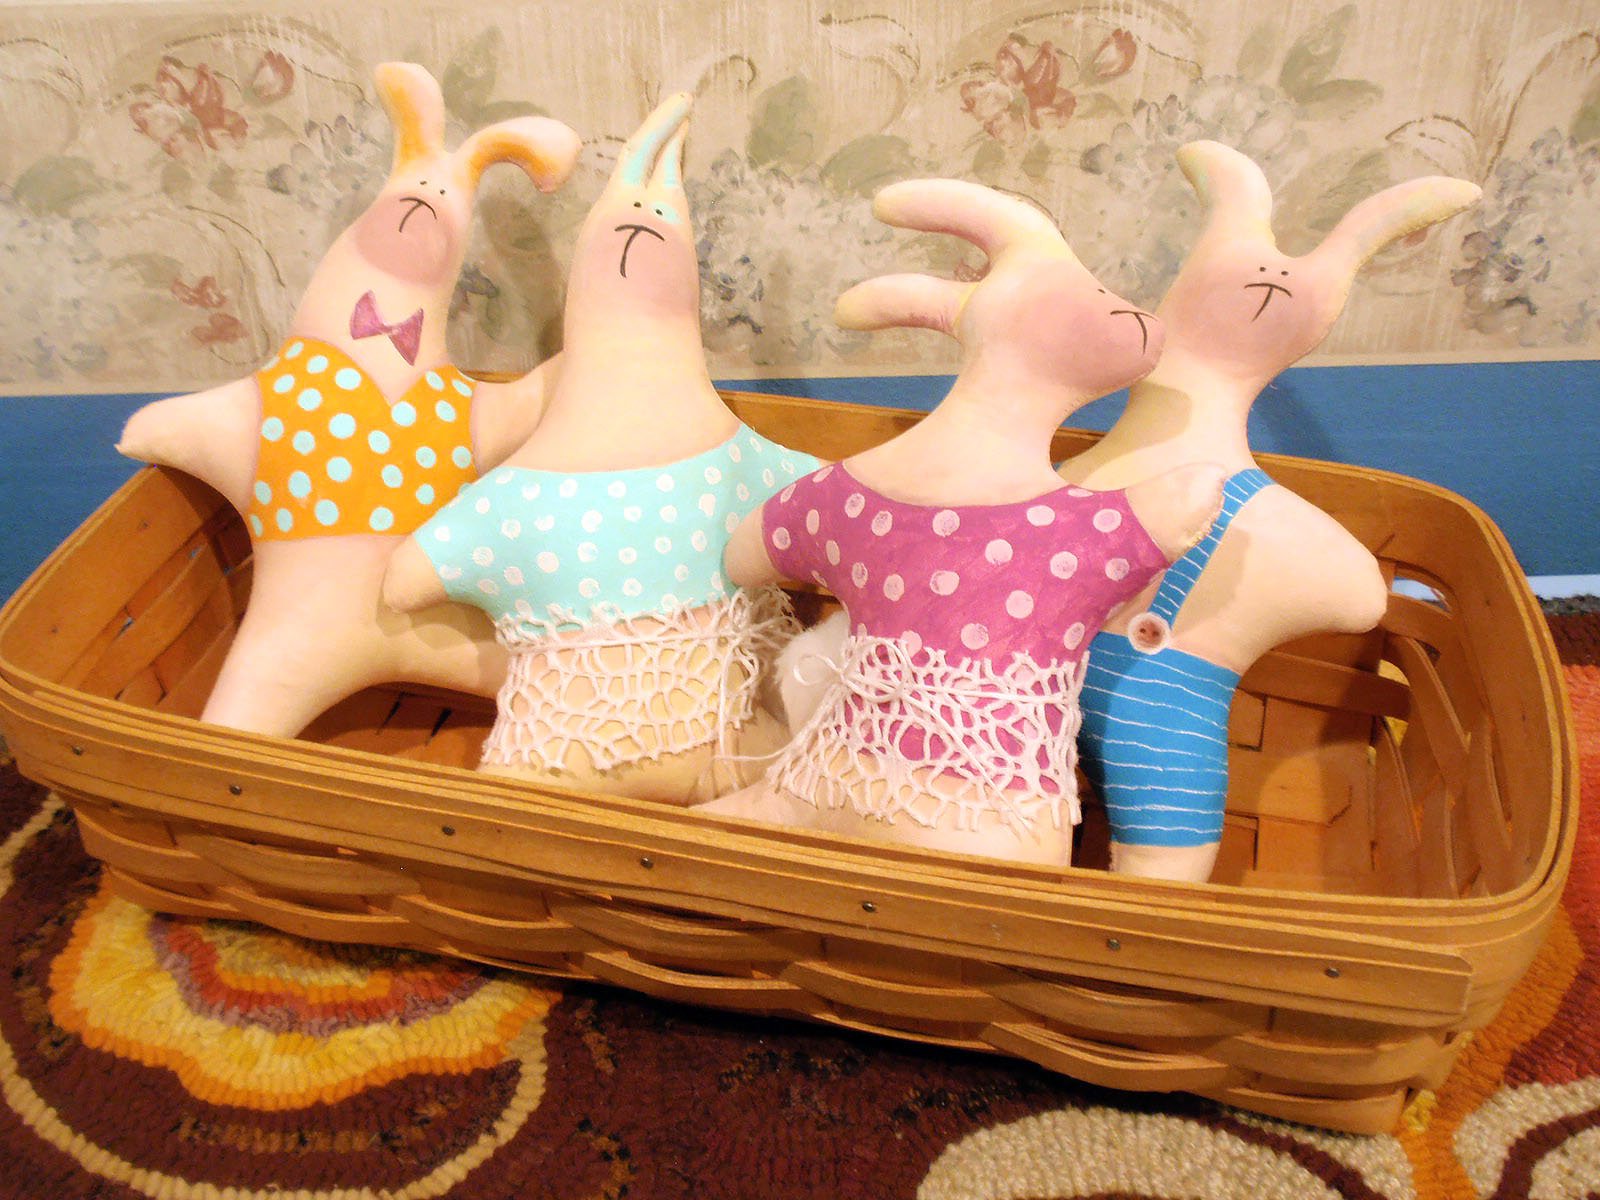 Fabric Bunny Dolls: Whimsical Painted Easter Decor